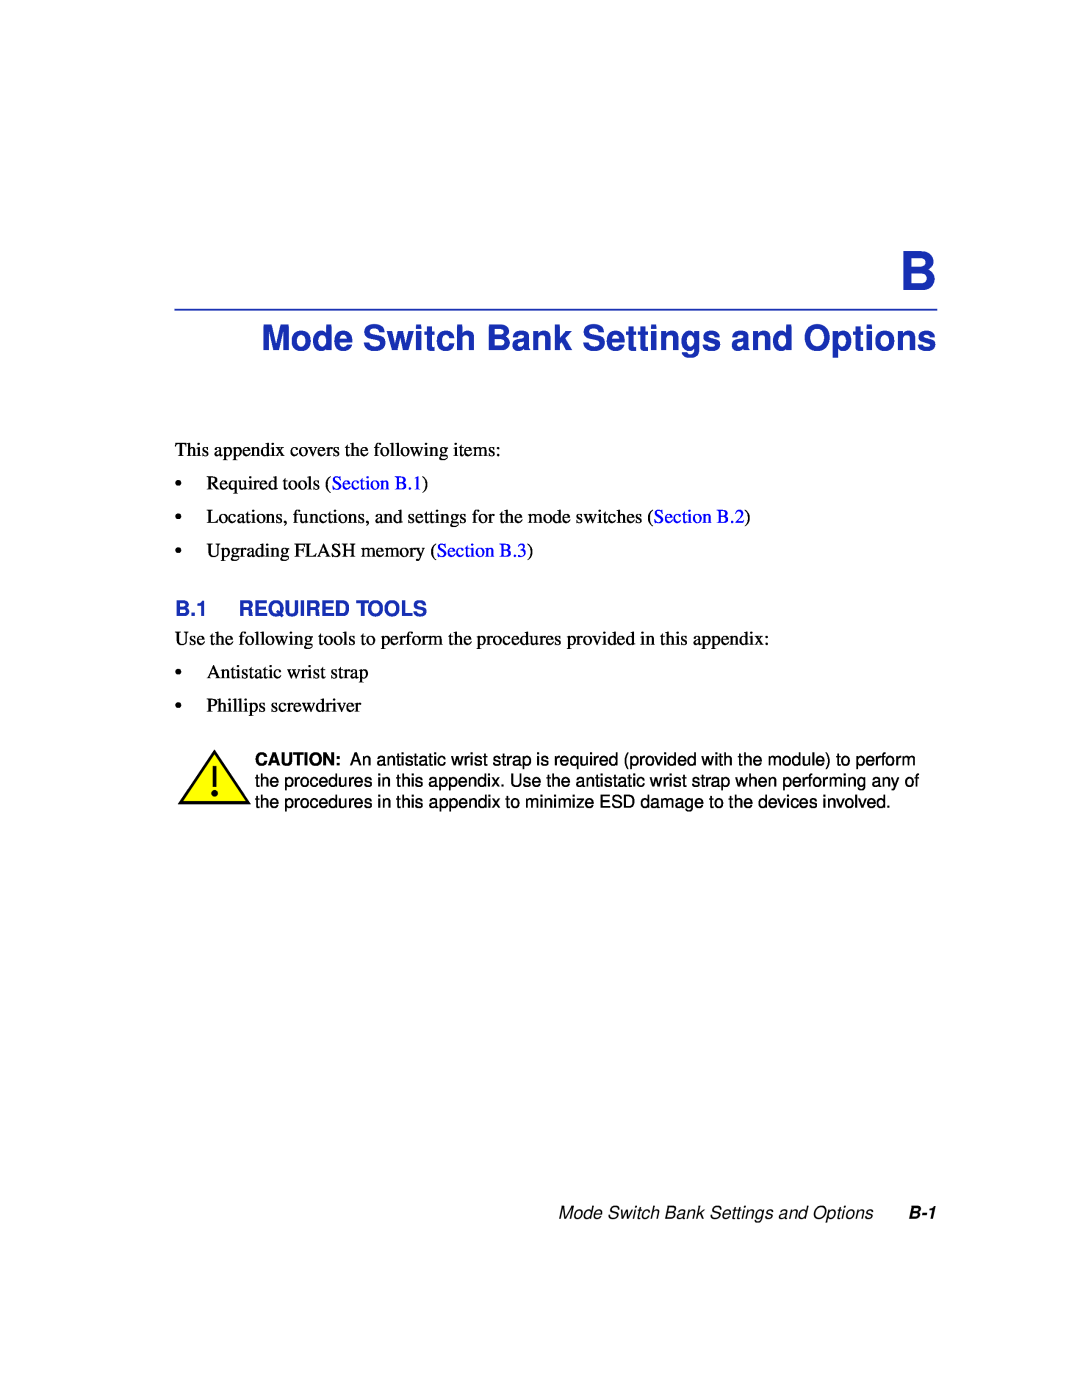 Enterasys Networks 6H352-25 manual Mode Switch Bank Settings and Options, B.1 REQUIRED TOOLS 